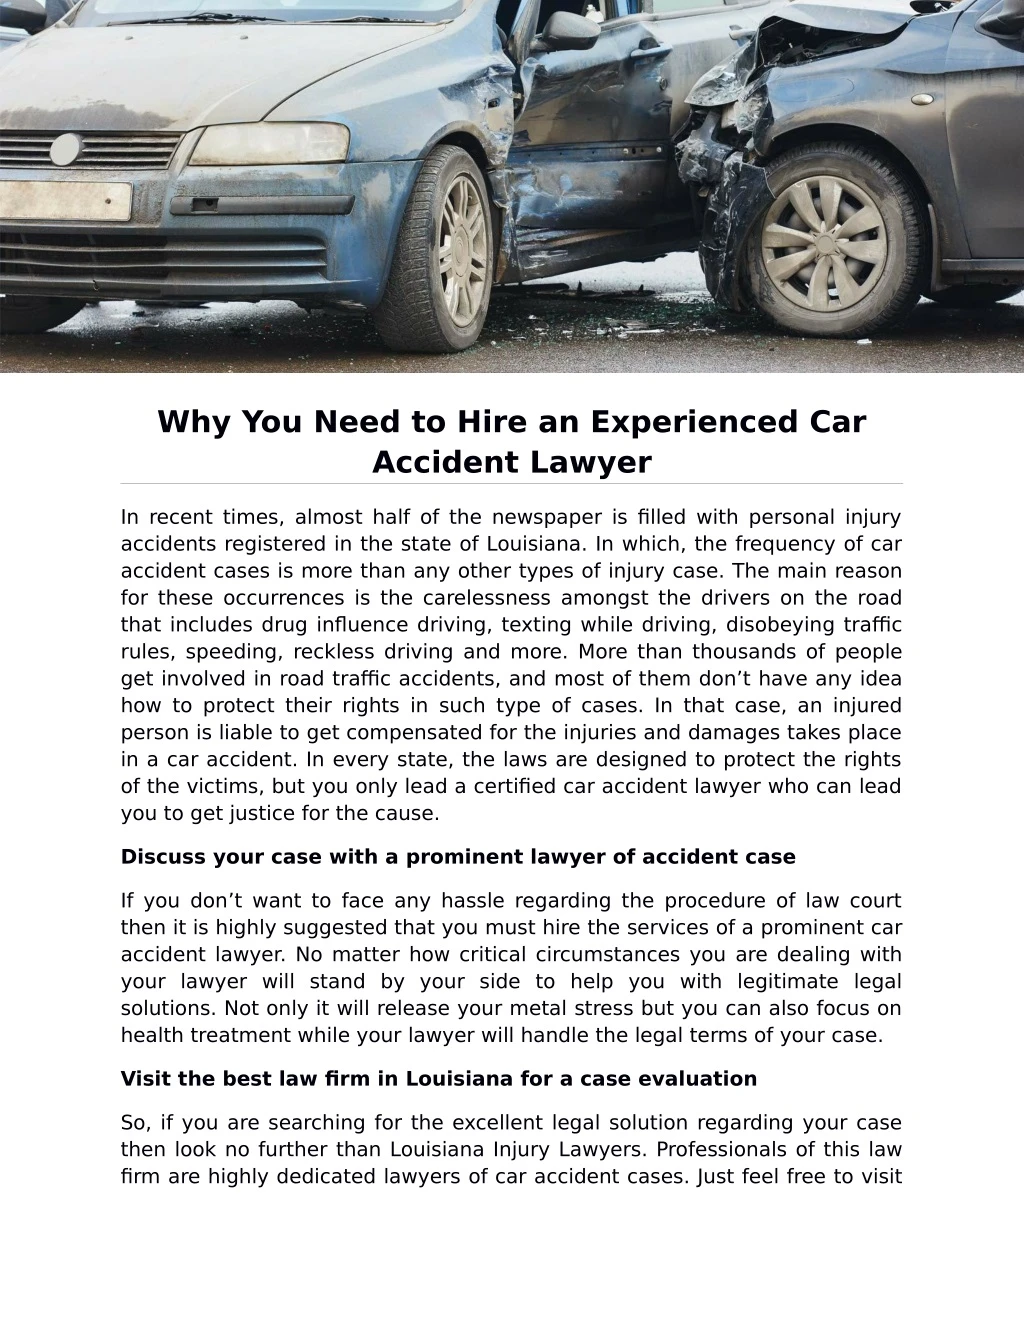 why you need to hire an experienced car accident